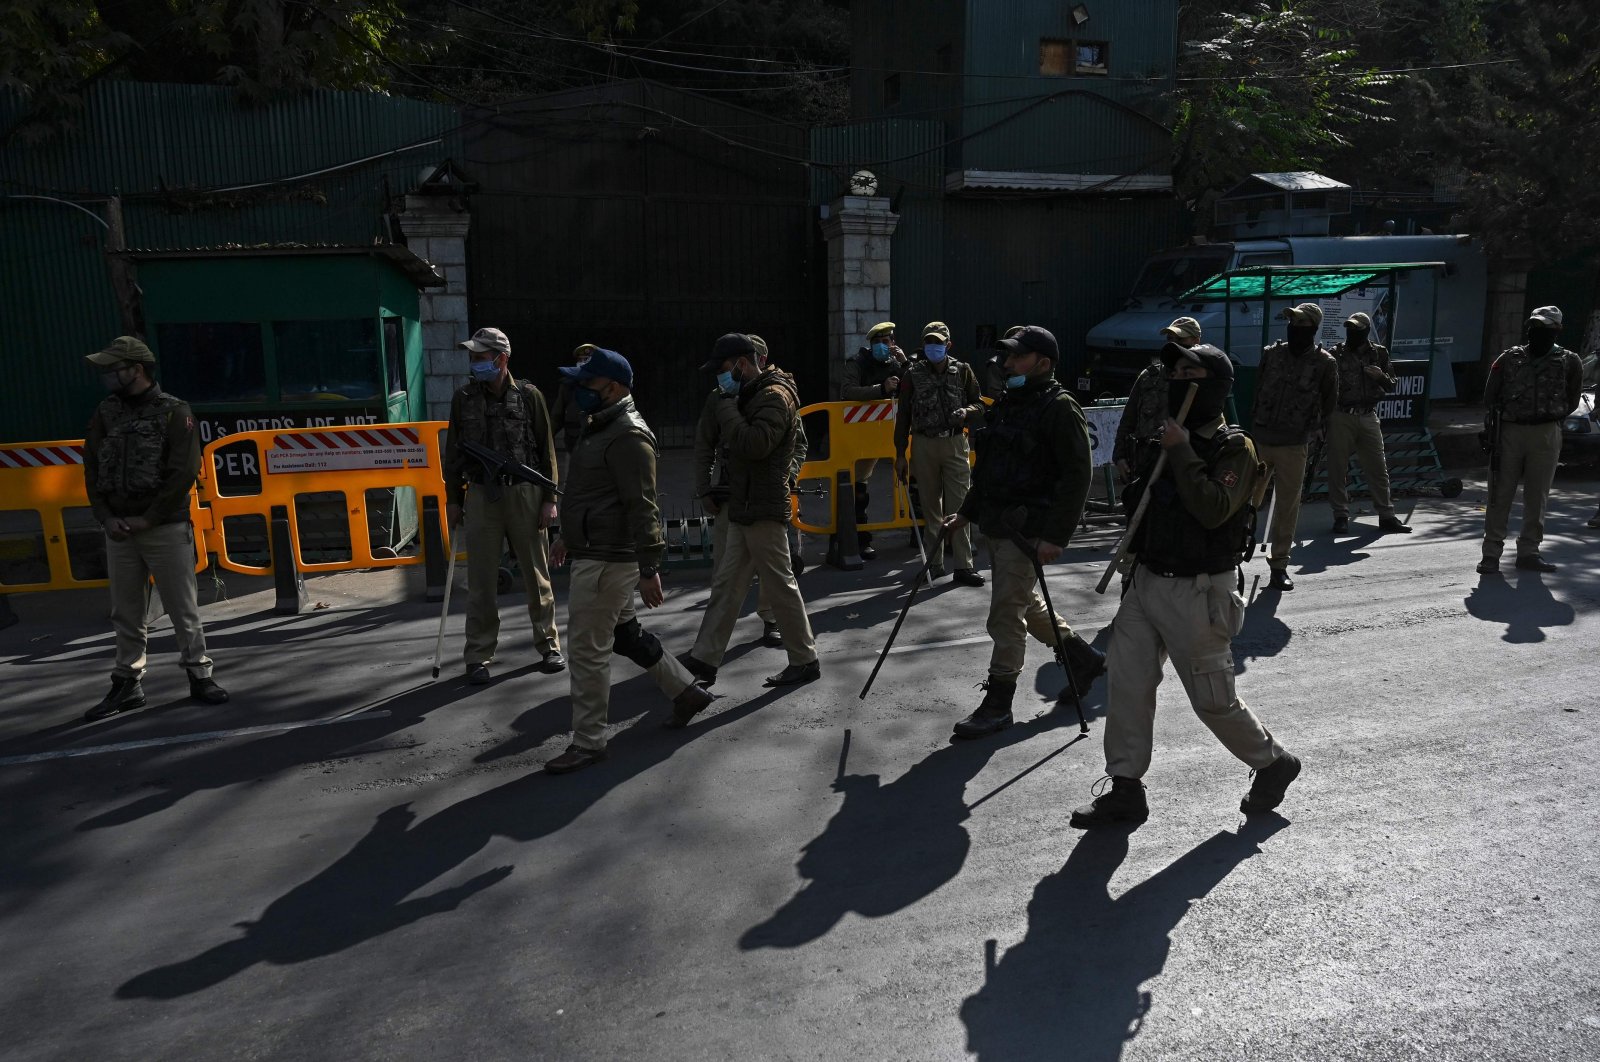 Indian government forces stand guard during a demonstration, Srinagar, disputed Jammu and Kashmir, Oct. 26, 2020. (AFP Photo)